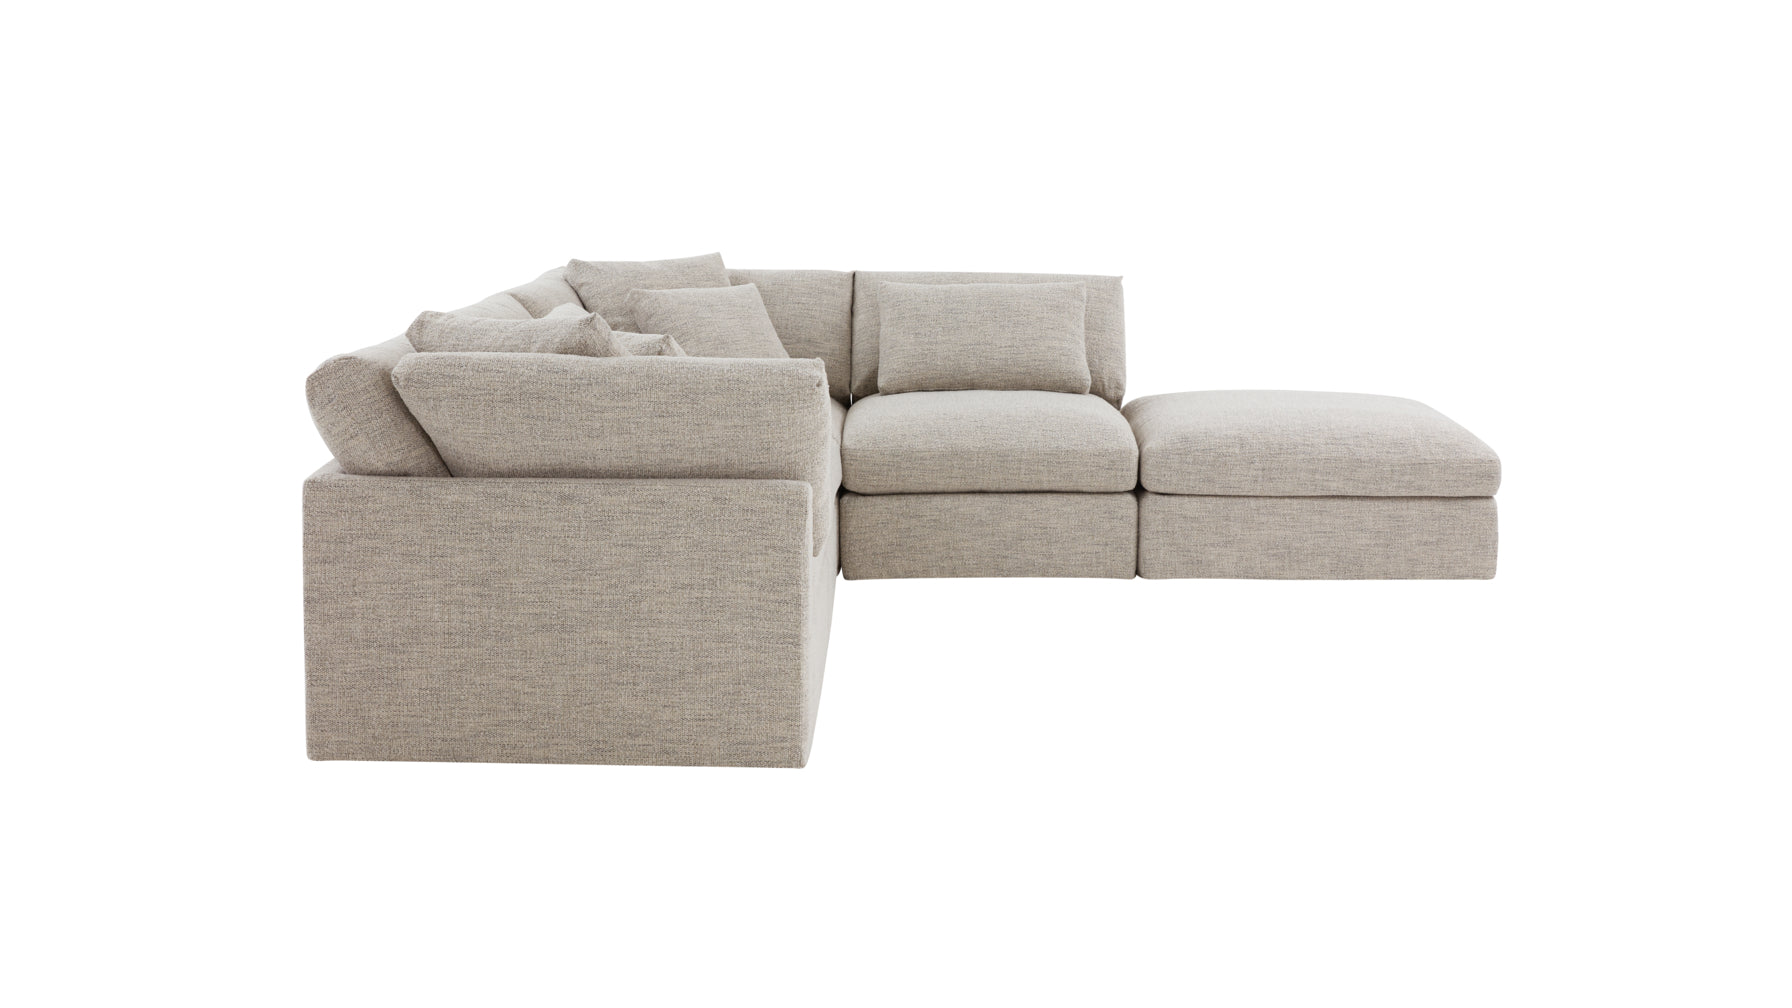 Get Together™ 5-Piece Modular Sectional, Large, Oatmeal - Image 6